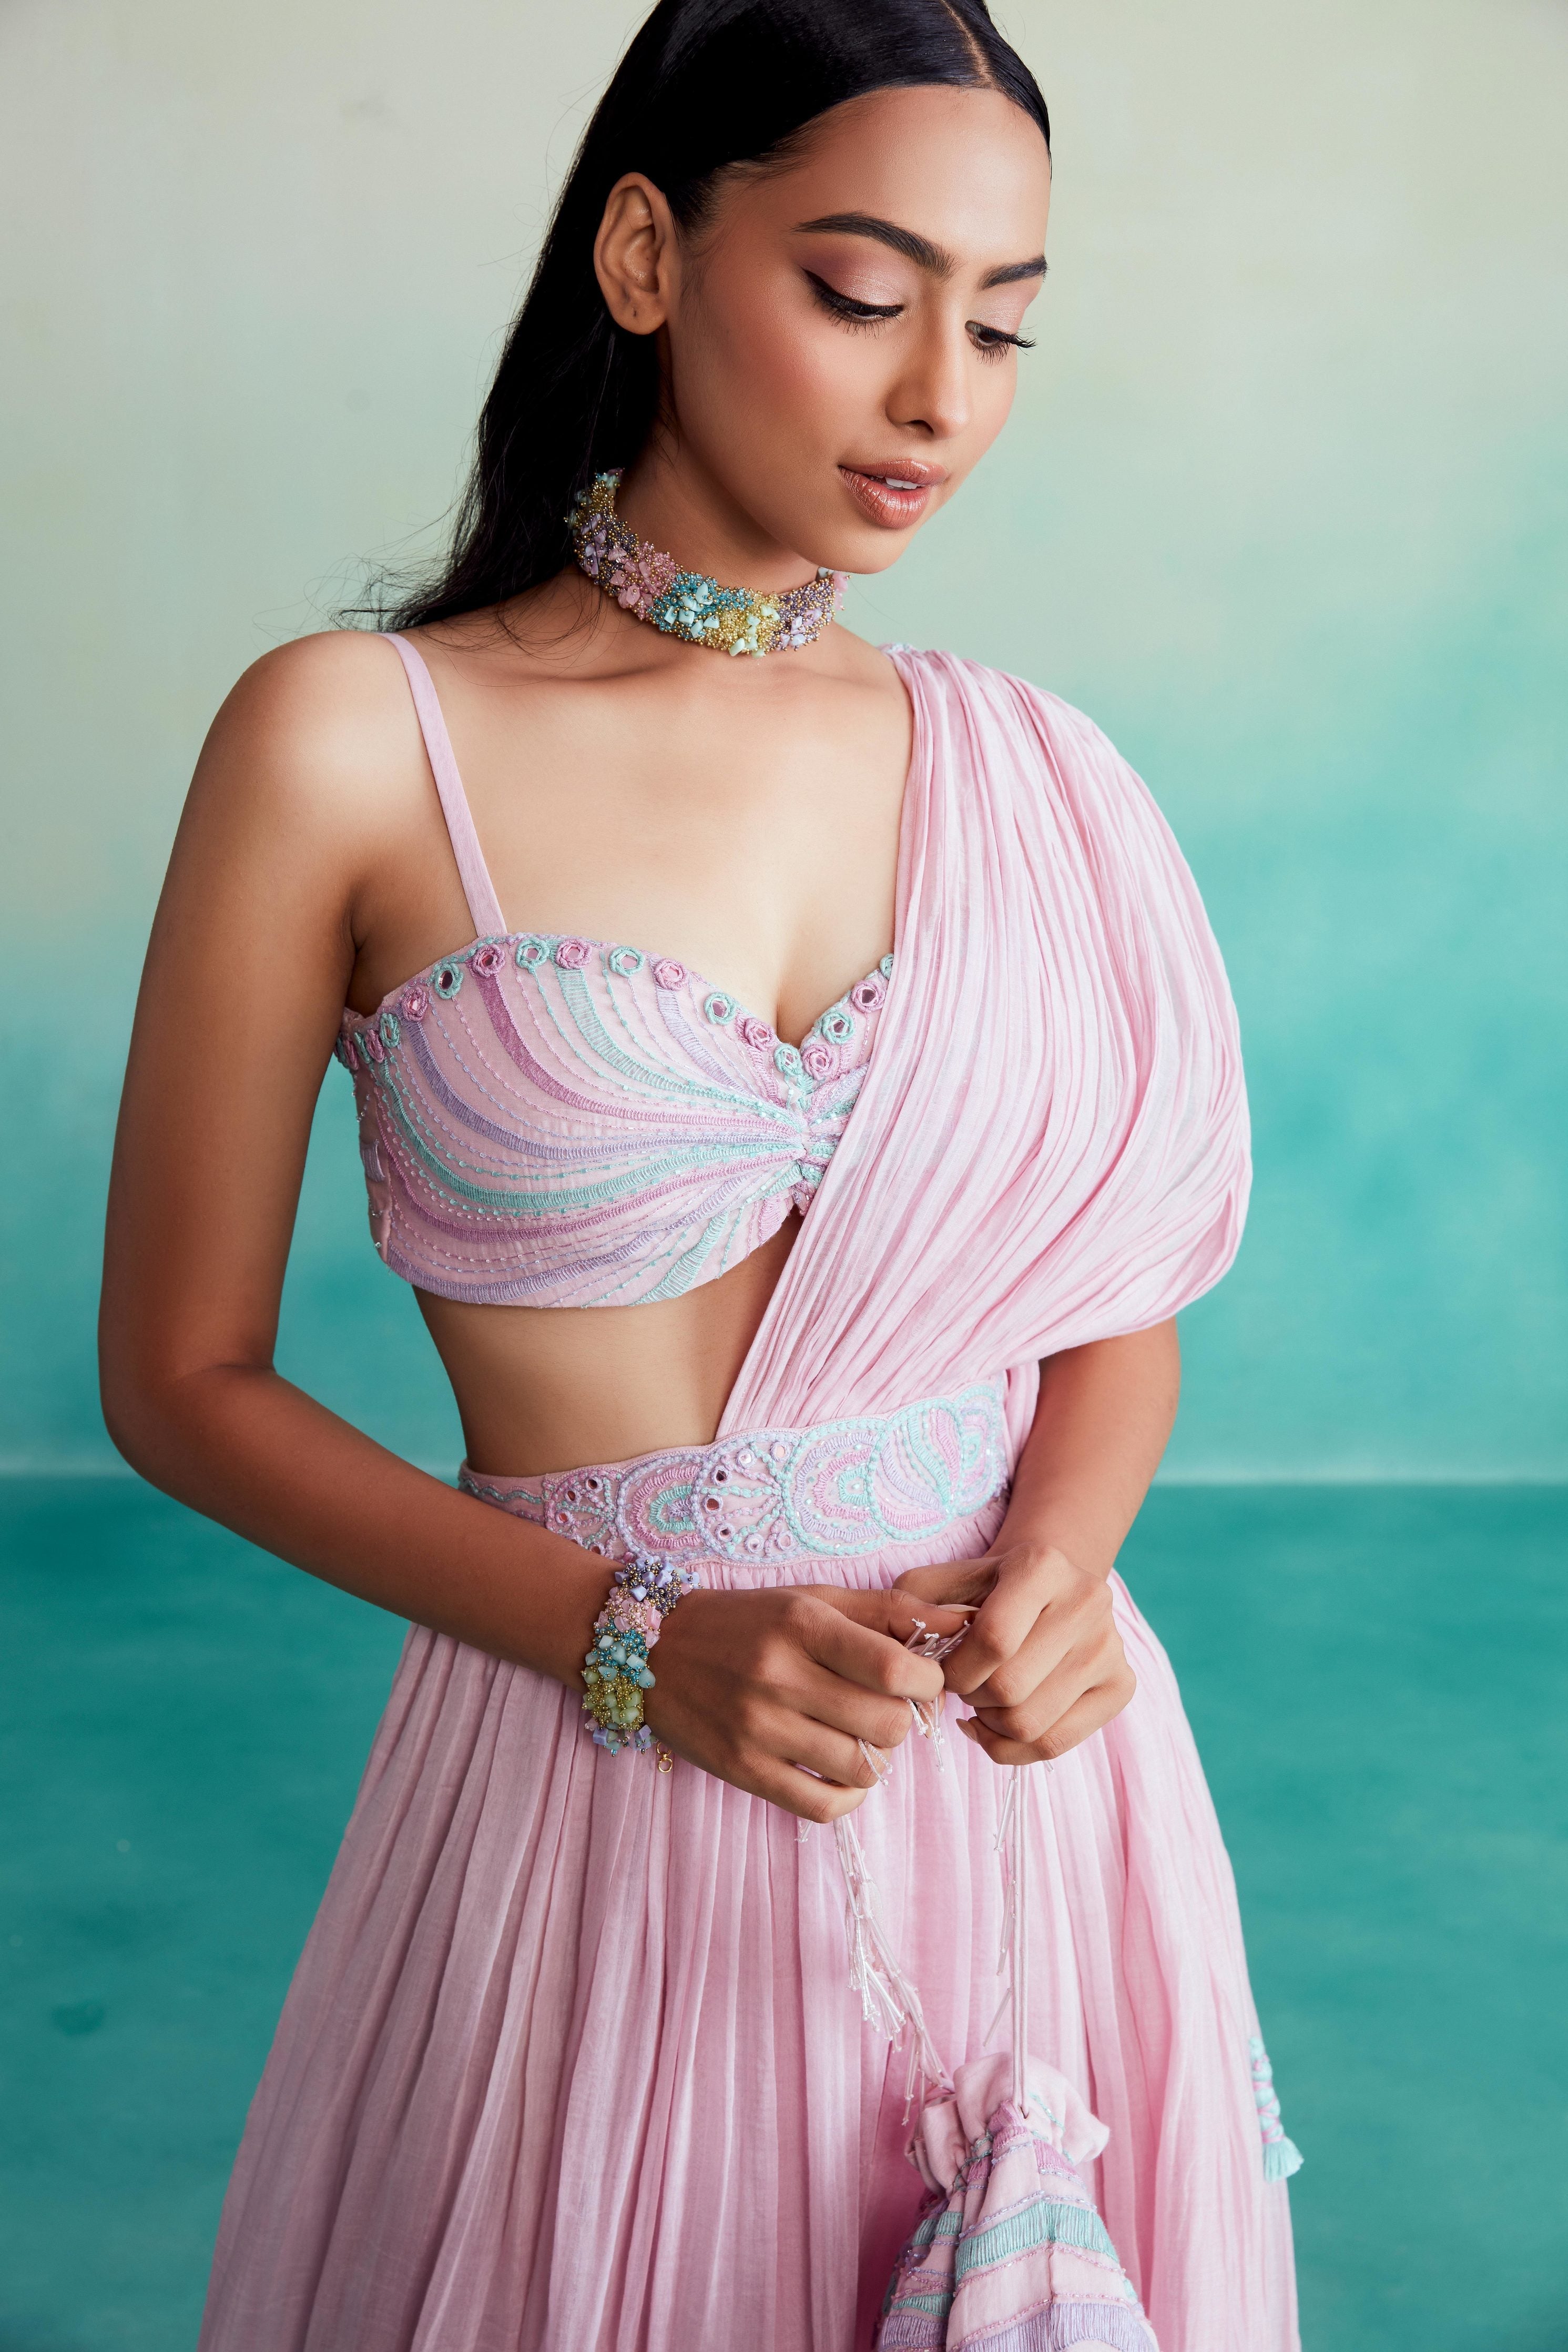 Bloomsy skirt saree set - Orchid Pink Skirt Saree set with hand embroidered bustier